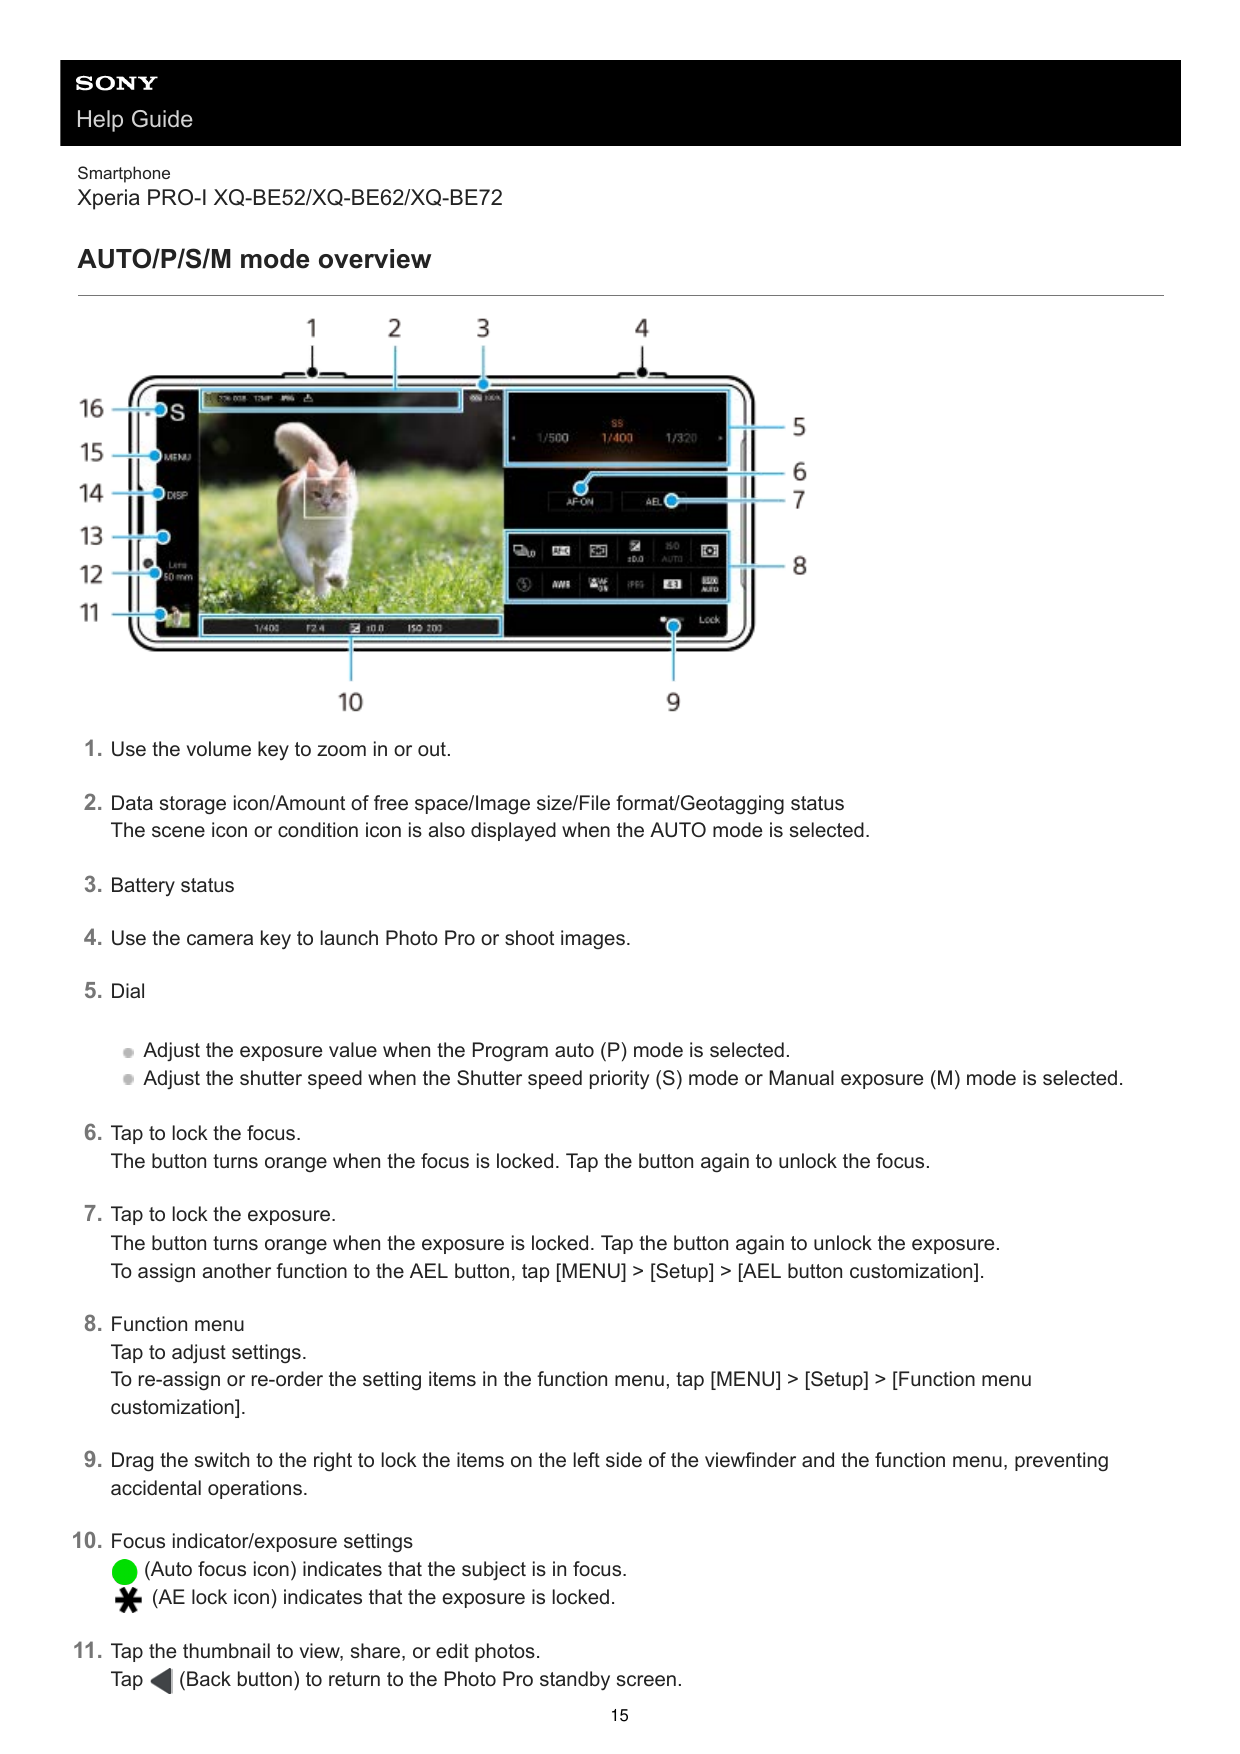 Help GuideSmartphoneXperia PRO-I XQ-BE52/XQ-BE62/XQ-BE72AUTO/P/S/M mode overview1. Use the volume key to zoom in or out.2. Data 